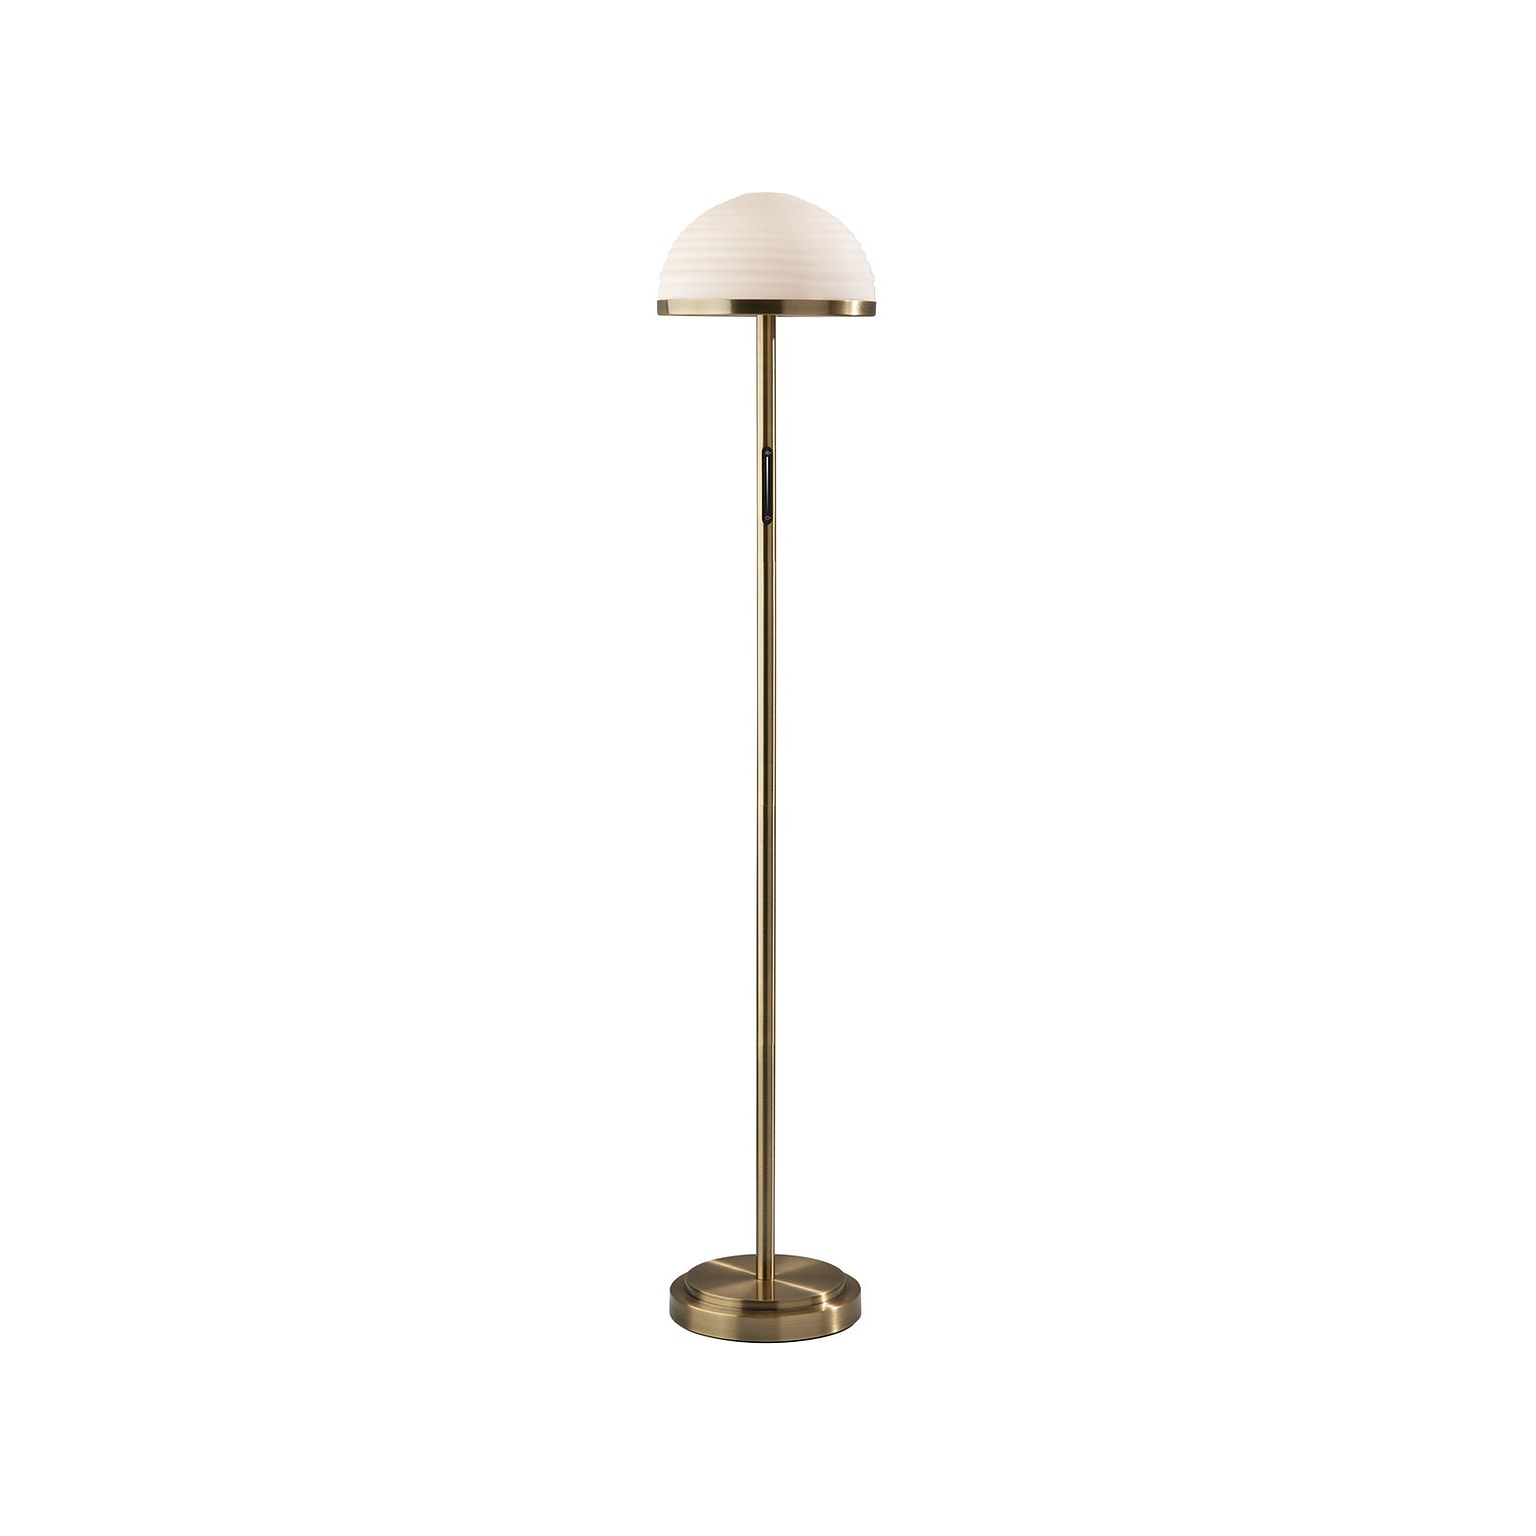 Adesso Juliana 54 Antique Brass Floor Lamp with Dome Shade (5188-21)